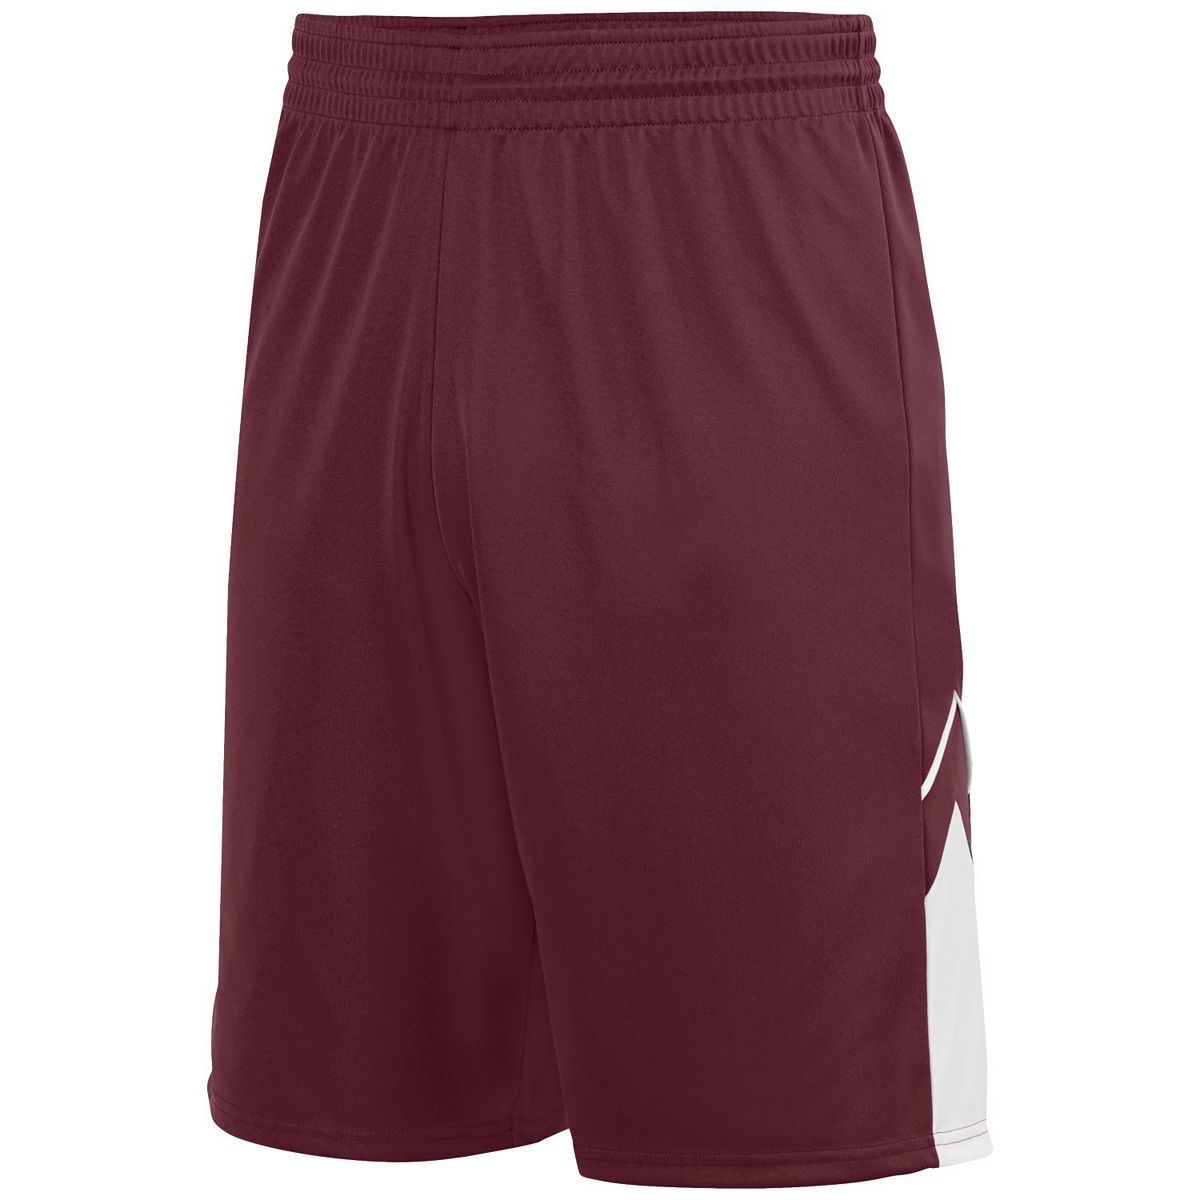 Augusta Sportswear Youth Alley-Oop Reversible Shorts in Maroon/White  -Part of the Youth, Youth-Shorts, Augusta-Products, Basketball, All-Sports, All-Sports-1 product lines at KanaleyCreations.com